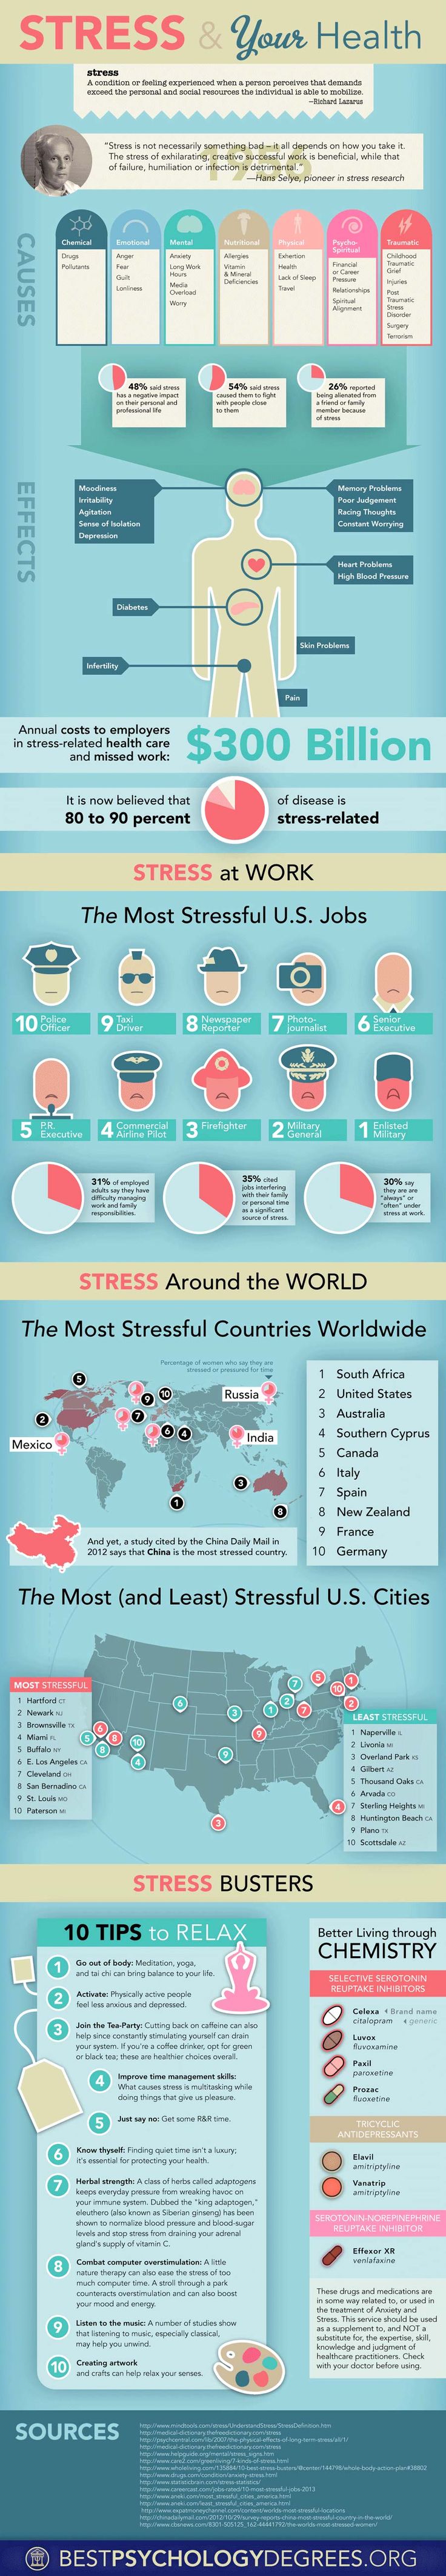 Psychology-Infographic-INFOgraphic-Dealing-with-Stress-Do-you-know-how-to-deal-with-and-control-str Psychology Infographic : #INFOgraphic > Dealing with Stress: Do you know how to deal with and control str...